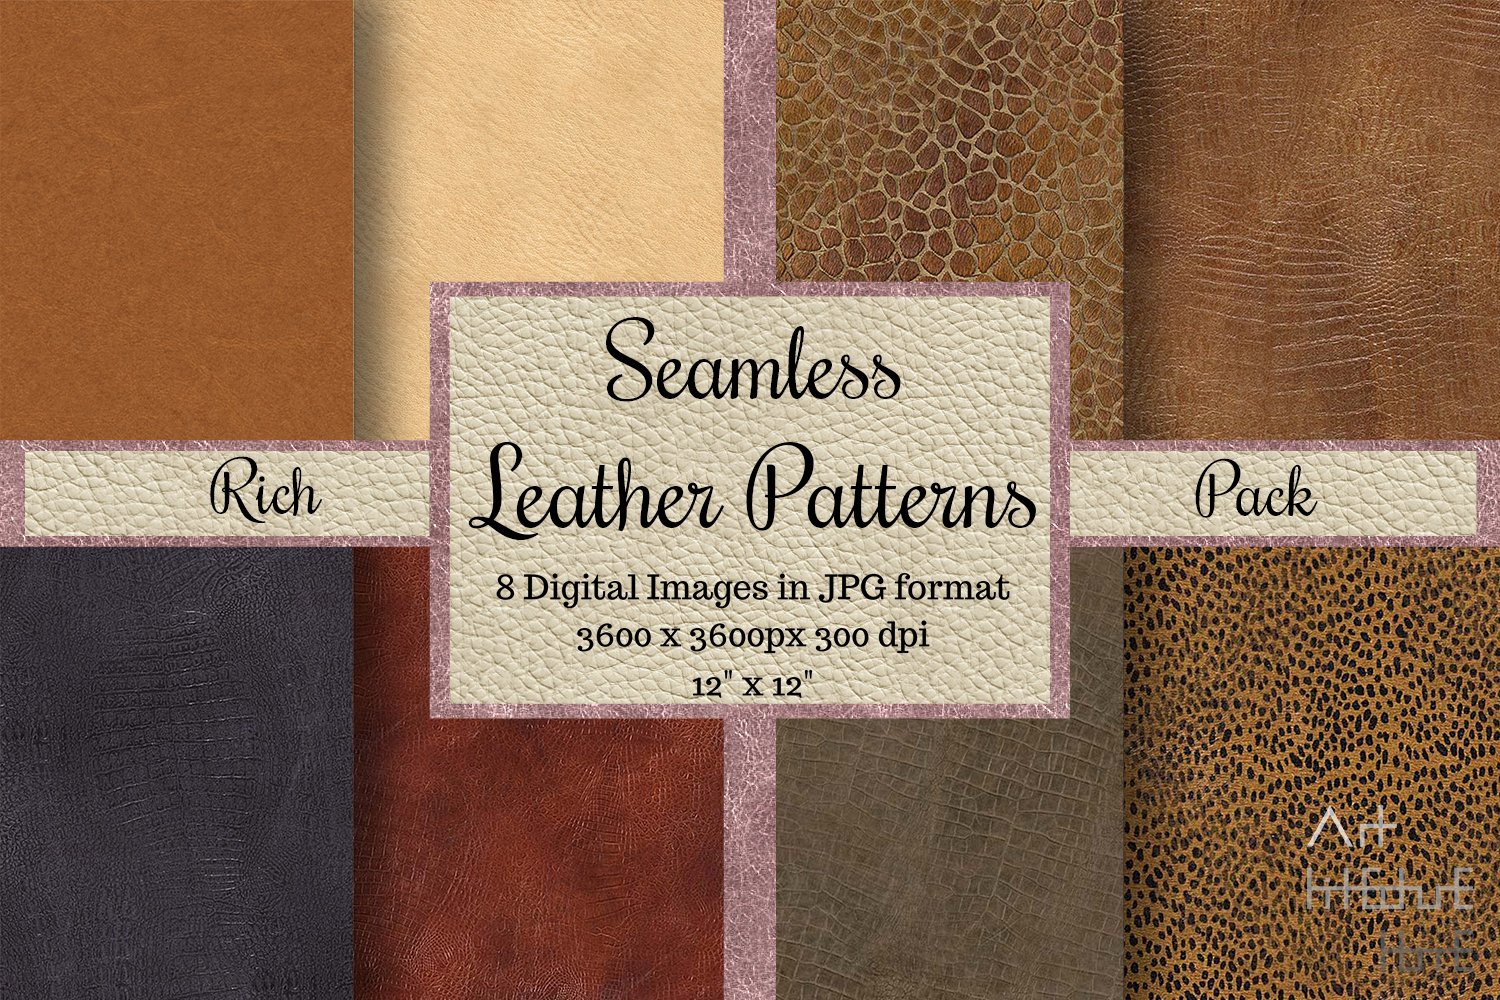 Seamless Leather Patterns Rich Pack cover image.